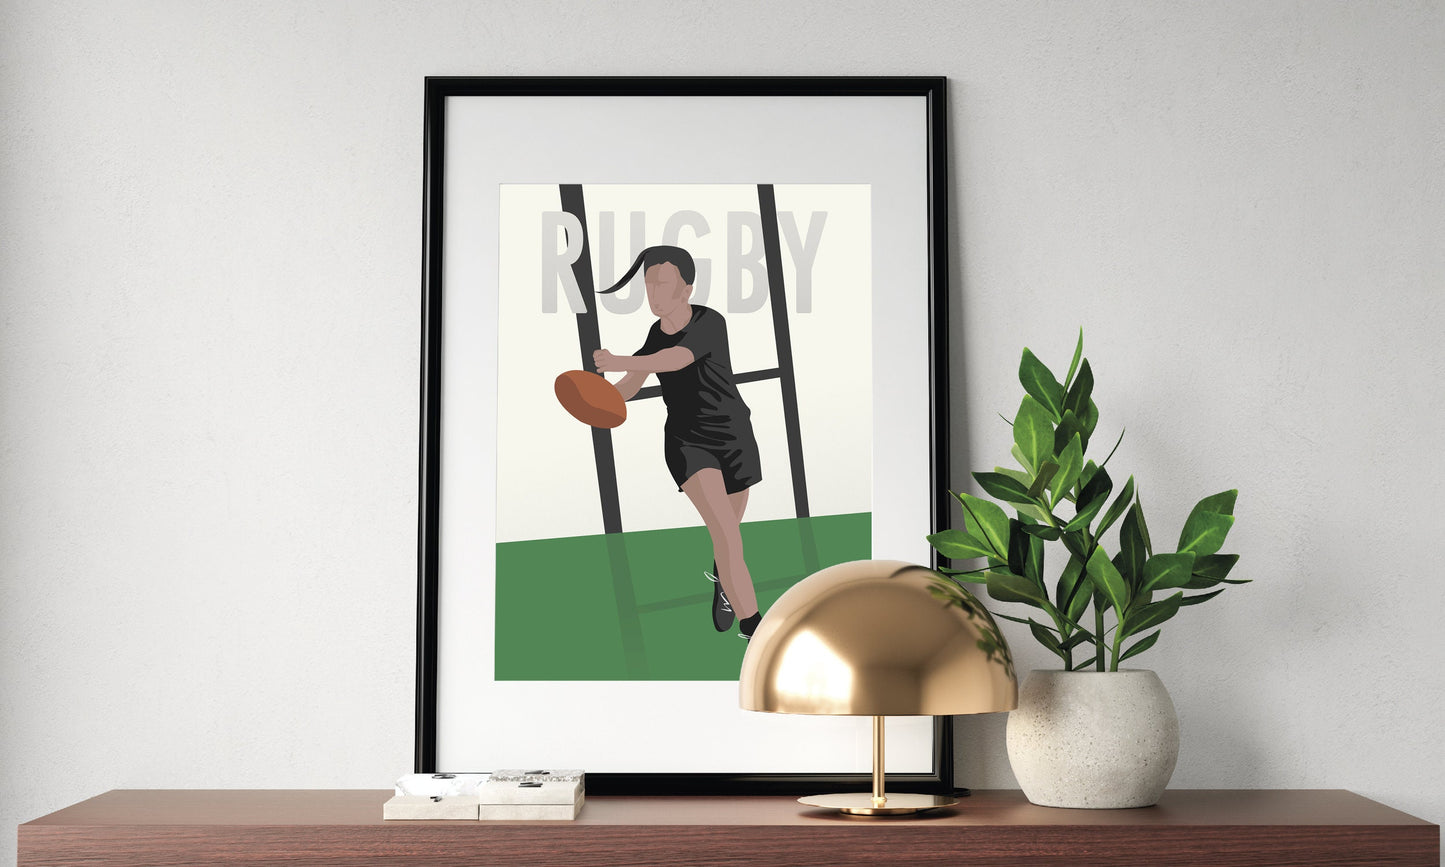 “Vintage women’s rugby” poster